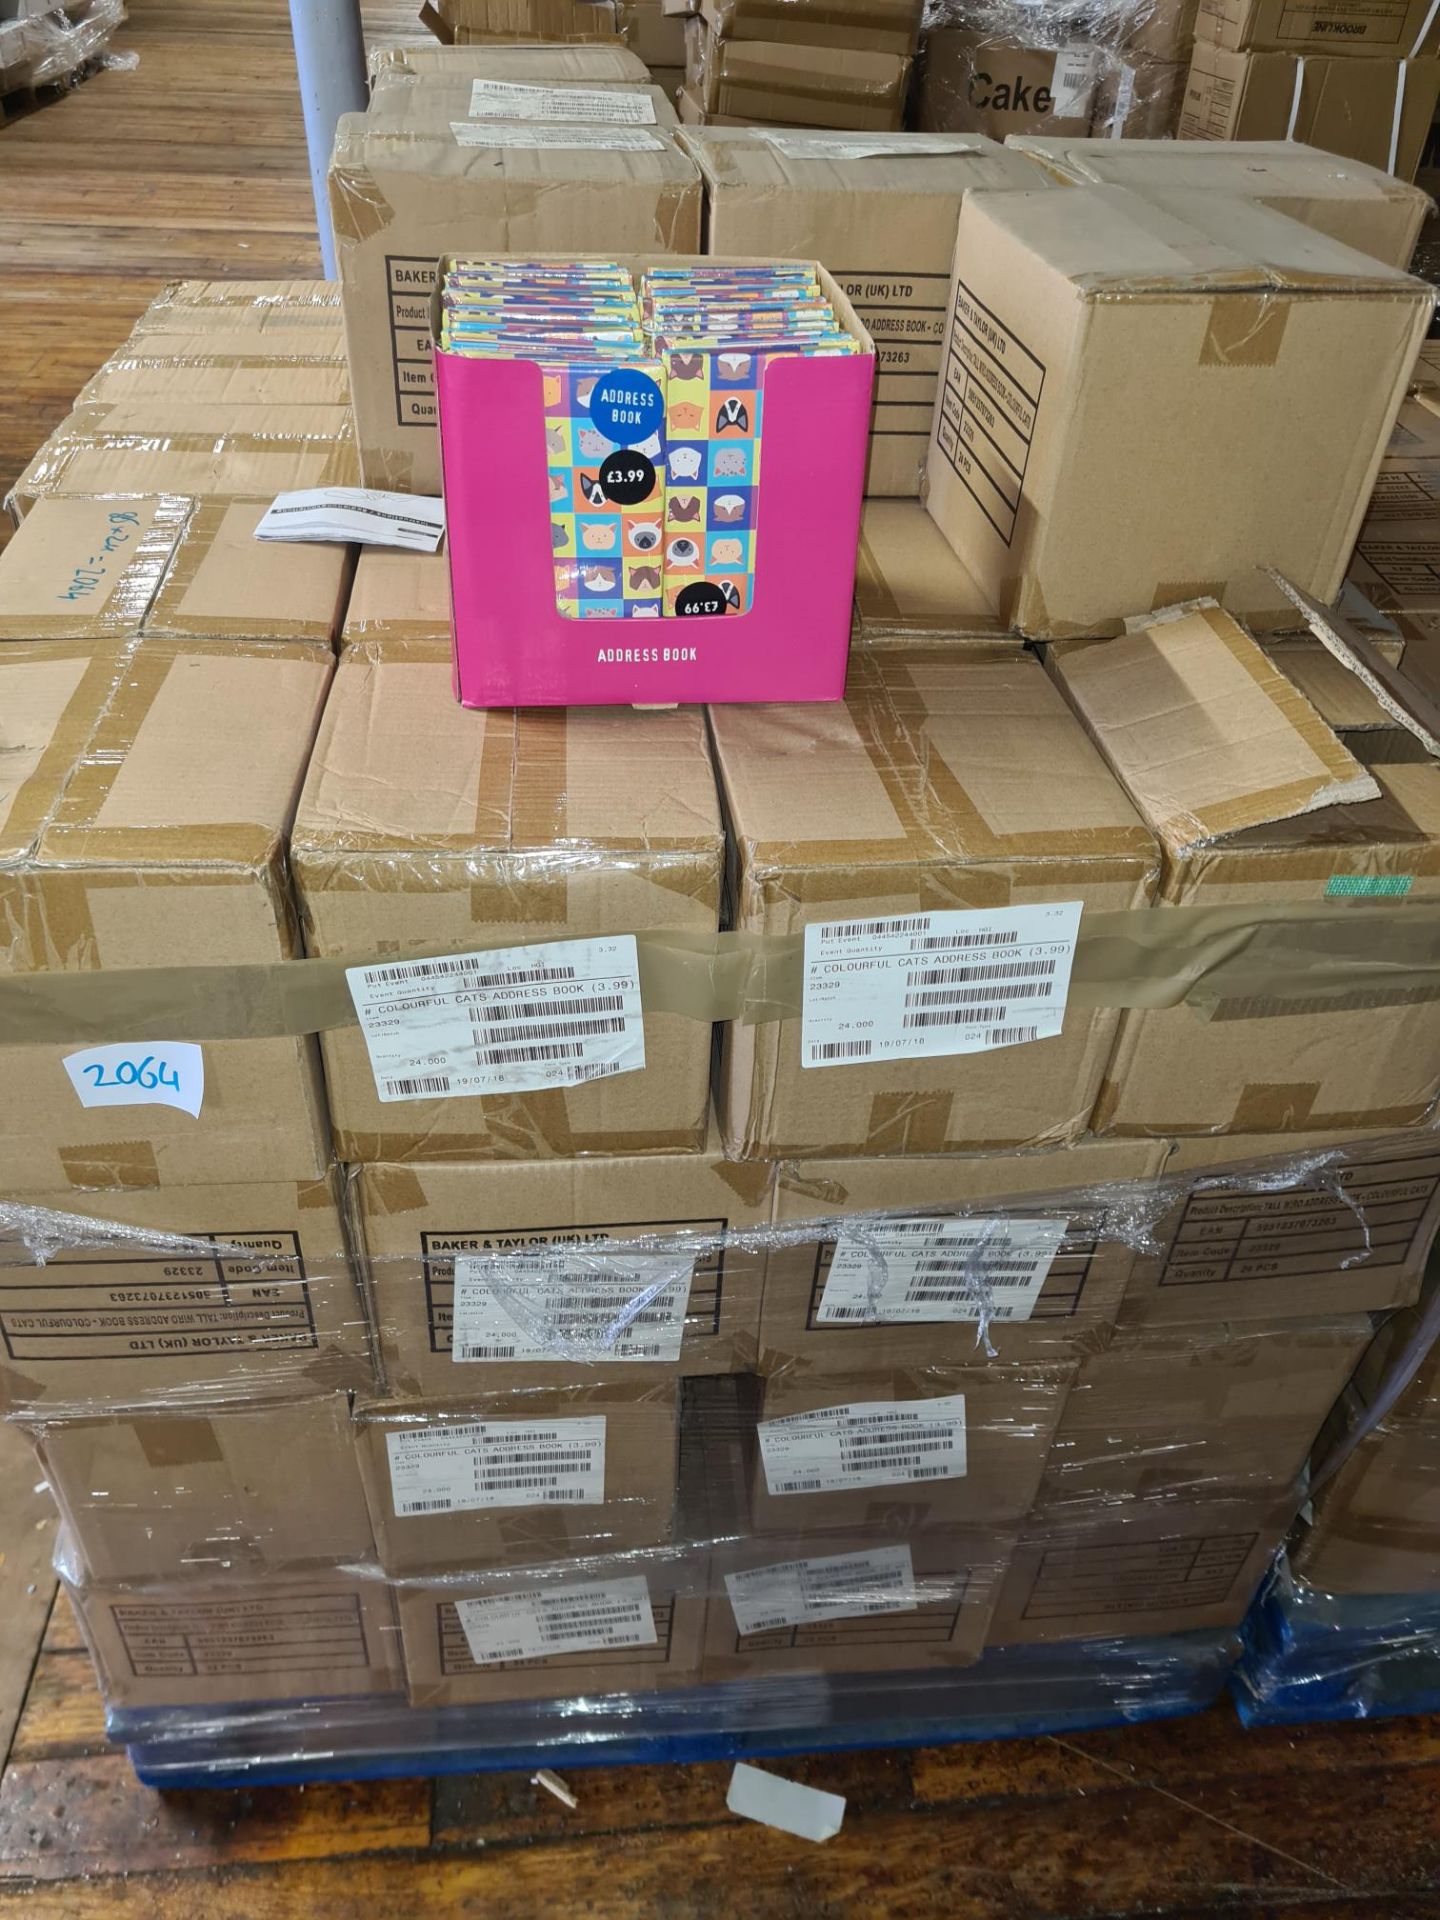 17 x Pallets of Brand New Assorted Stationary, (15000 pcs), Total RRP Approx. £70,000 - Image 24 of 26